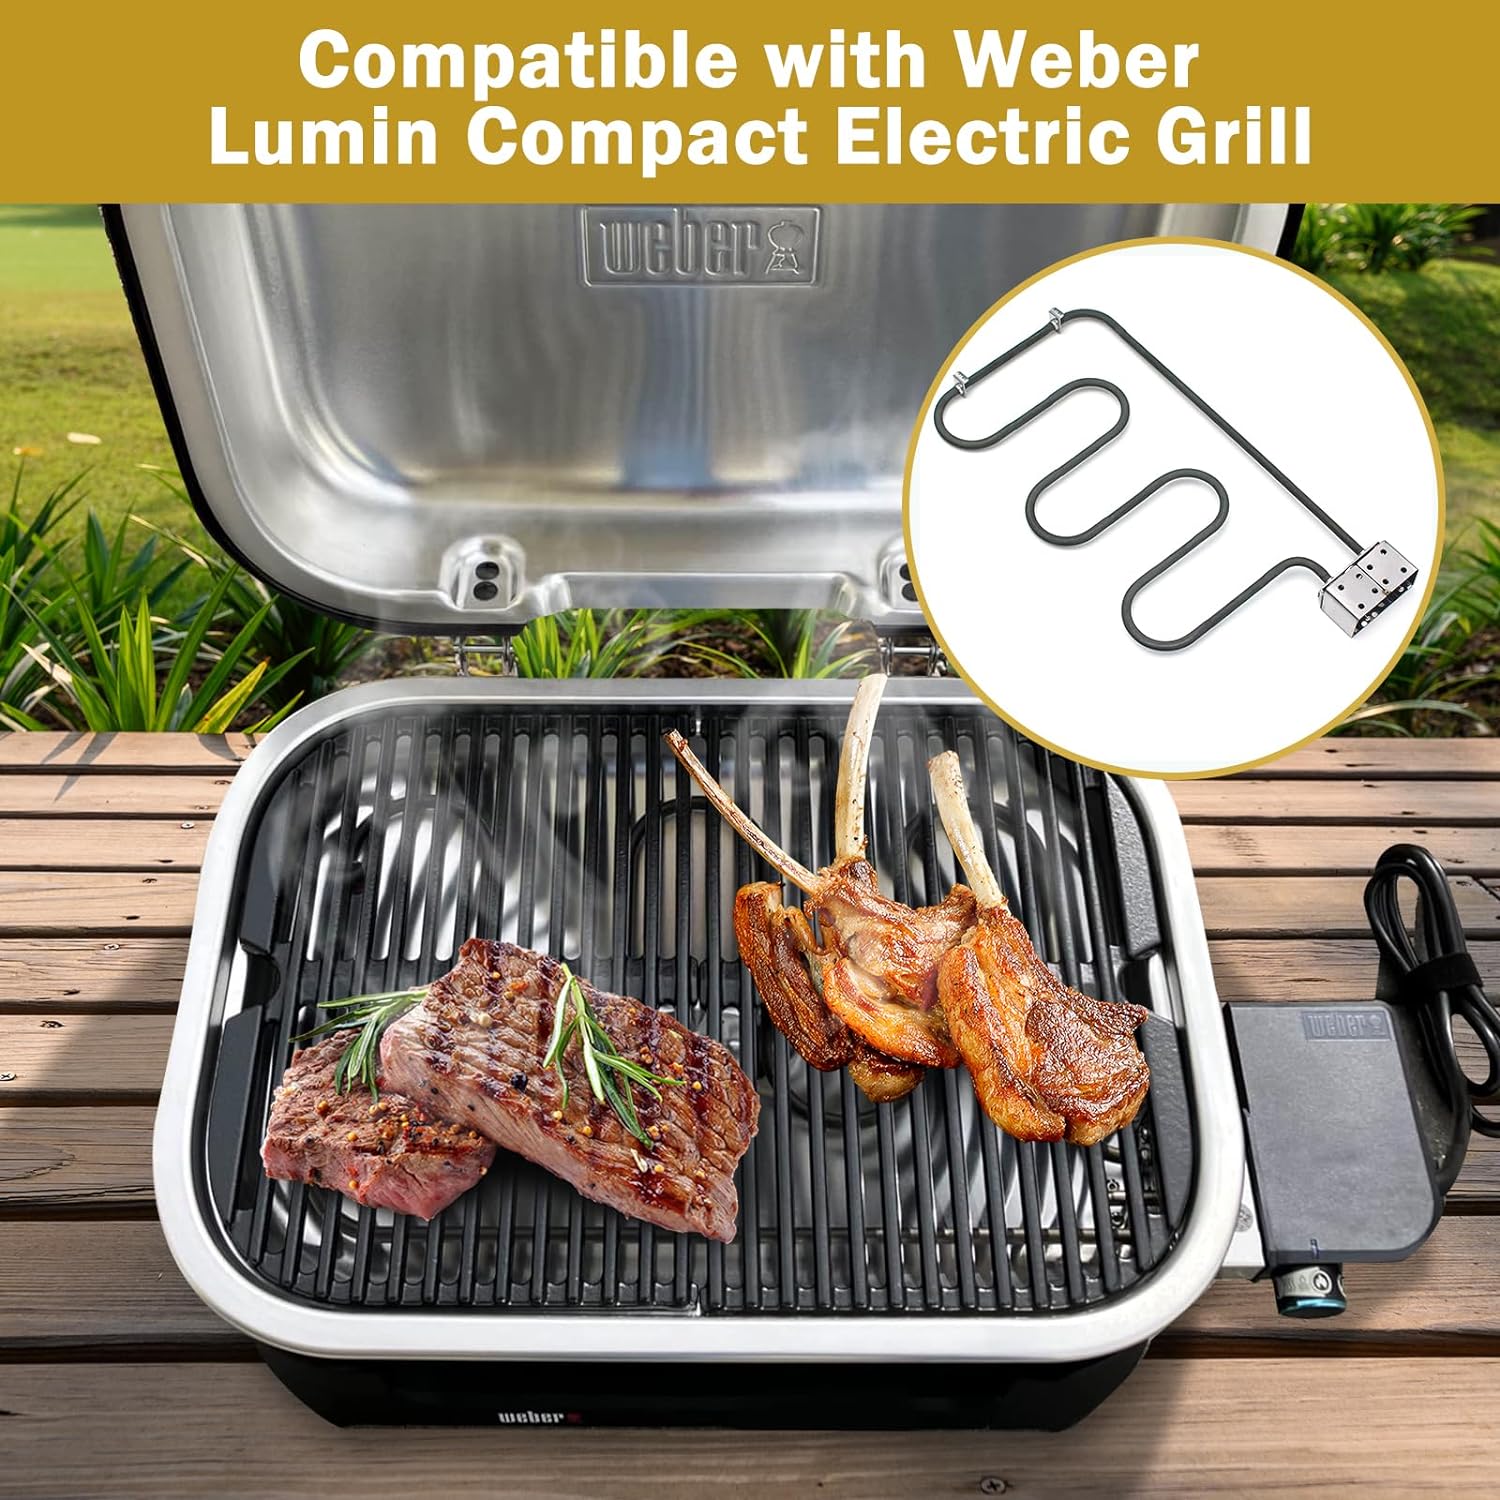 BMMXBI Grill Heating Element Compatible with Weber Lumin Compact Outdoor Electric Barbecue Grill, BBQ Weber Lumin Compact Grill Heating Element Parts - BMMXBI Grill Heating Element Review